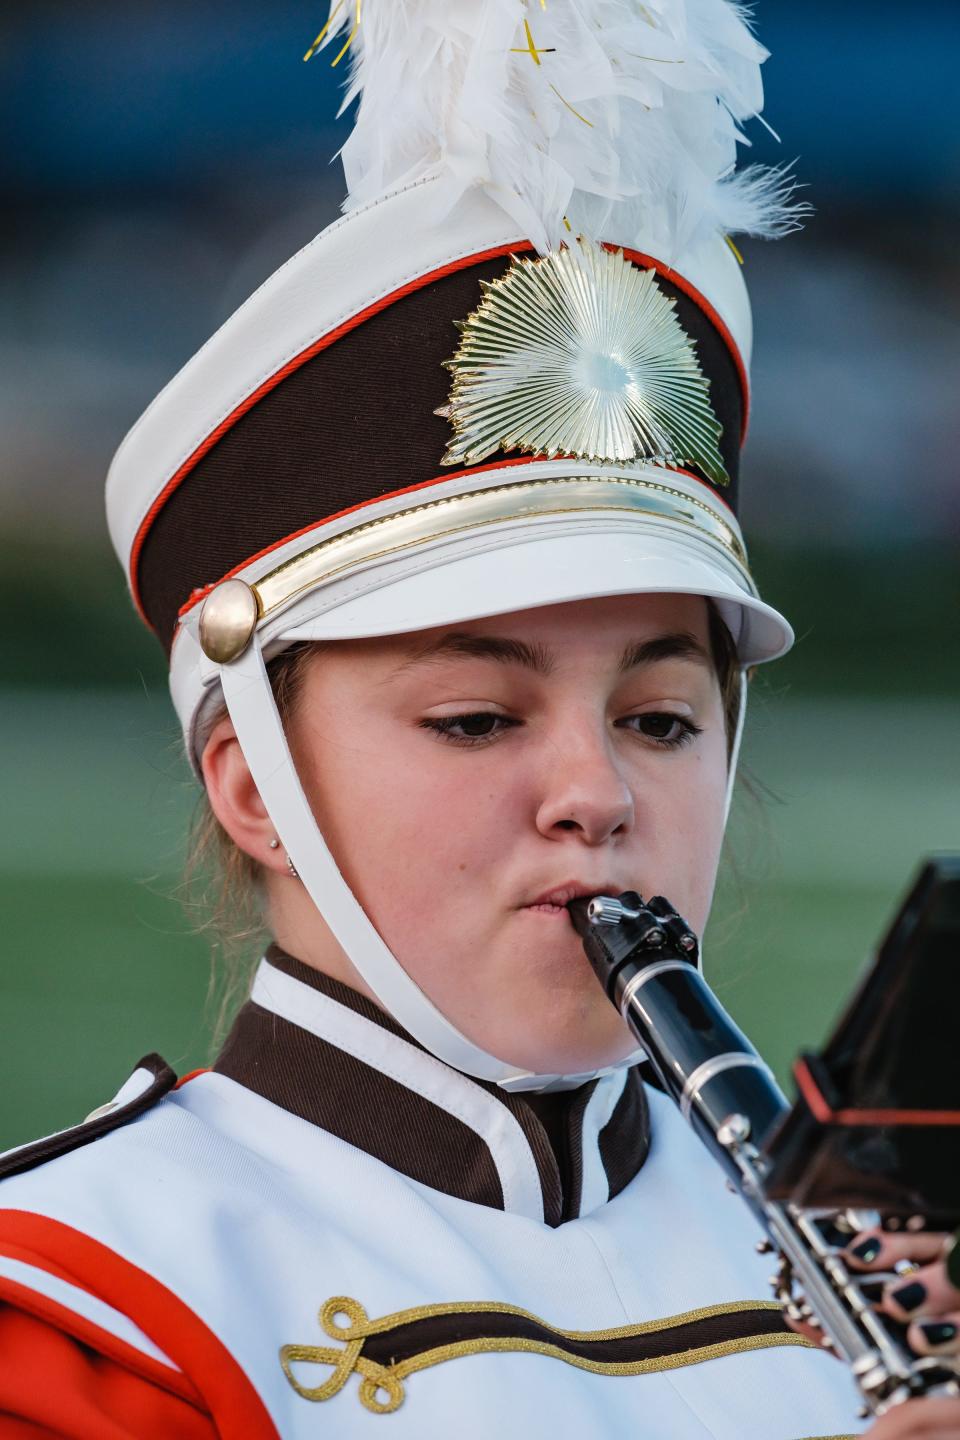 Claymont High School's Naomi Hallman is one of three marching band members traveling to New York City this year to play in the Macy's Thanksgiving Day Parade. The others are Dawson Cox and Alex Douglas.